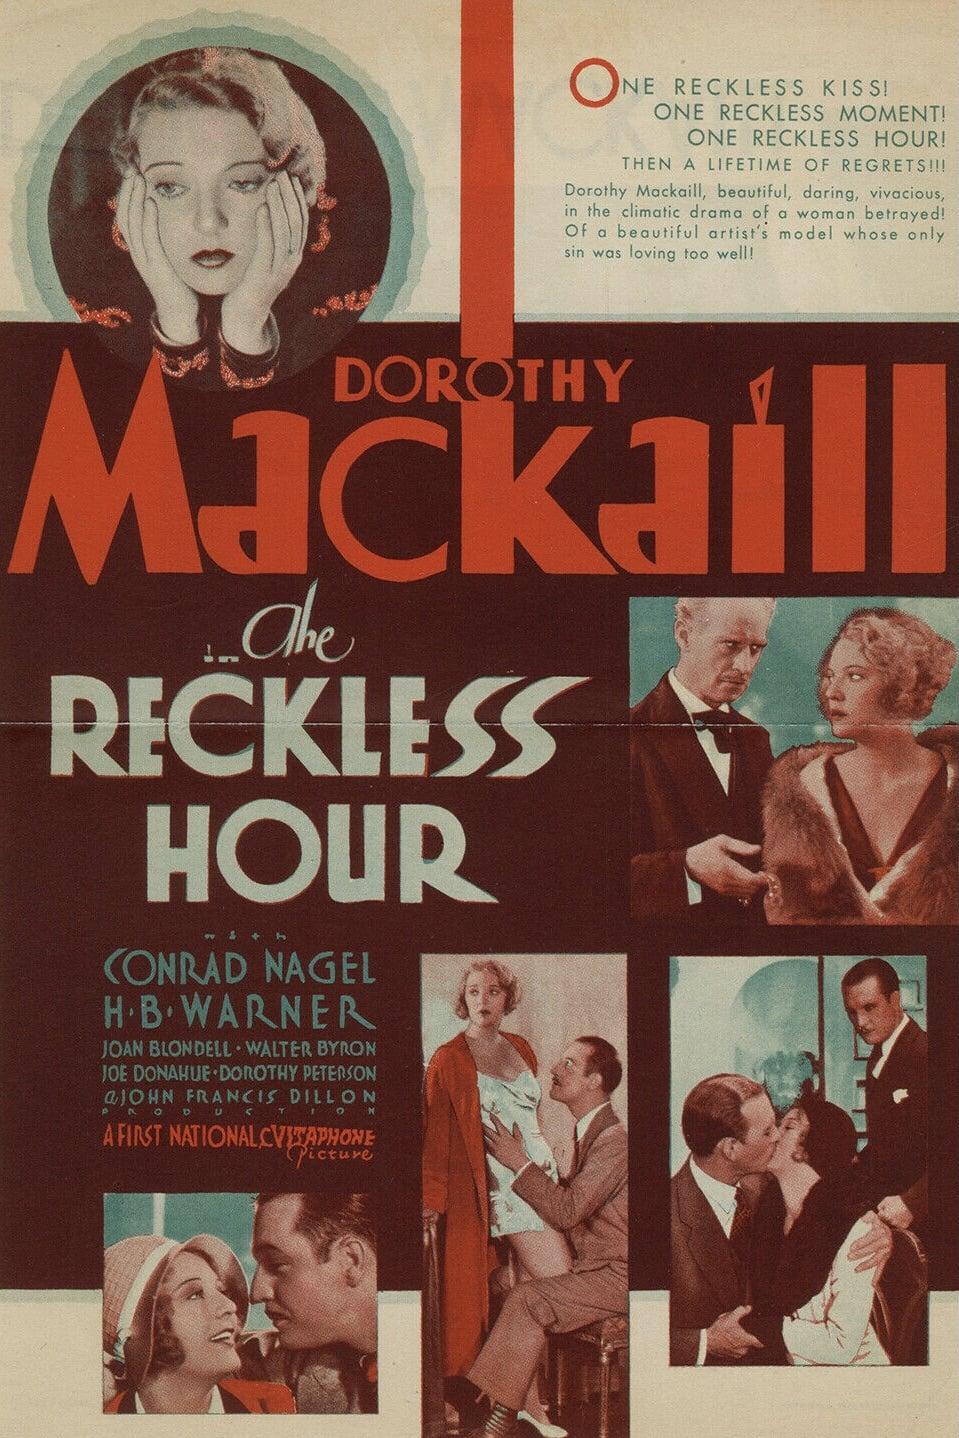 The Reckless Hour poster